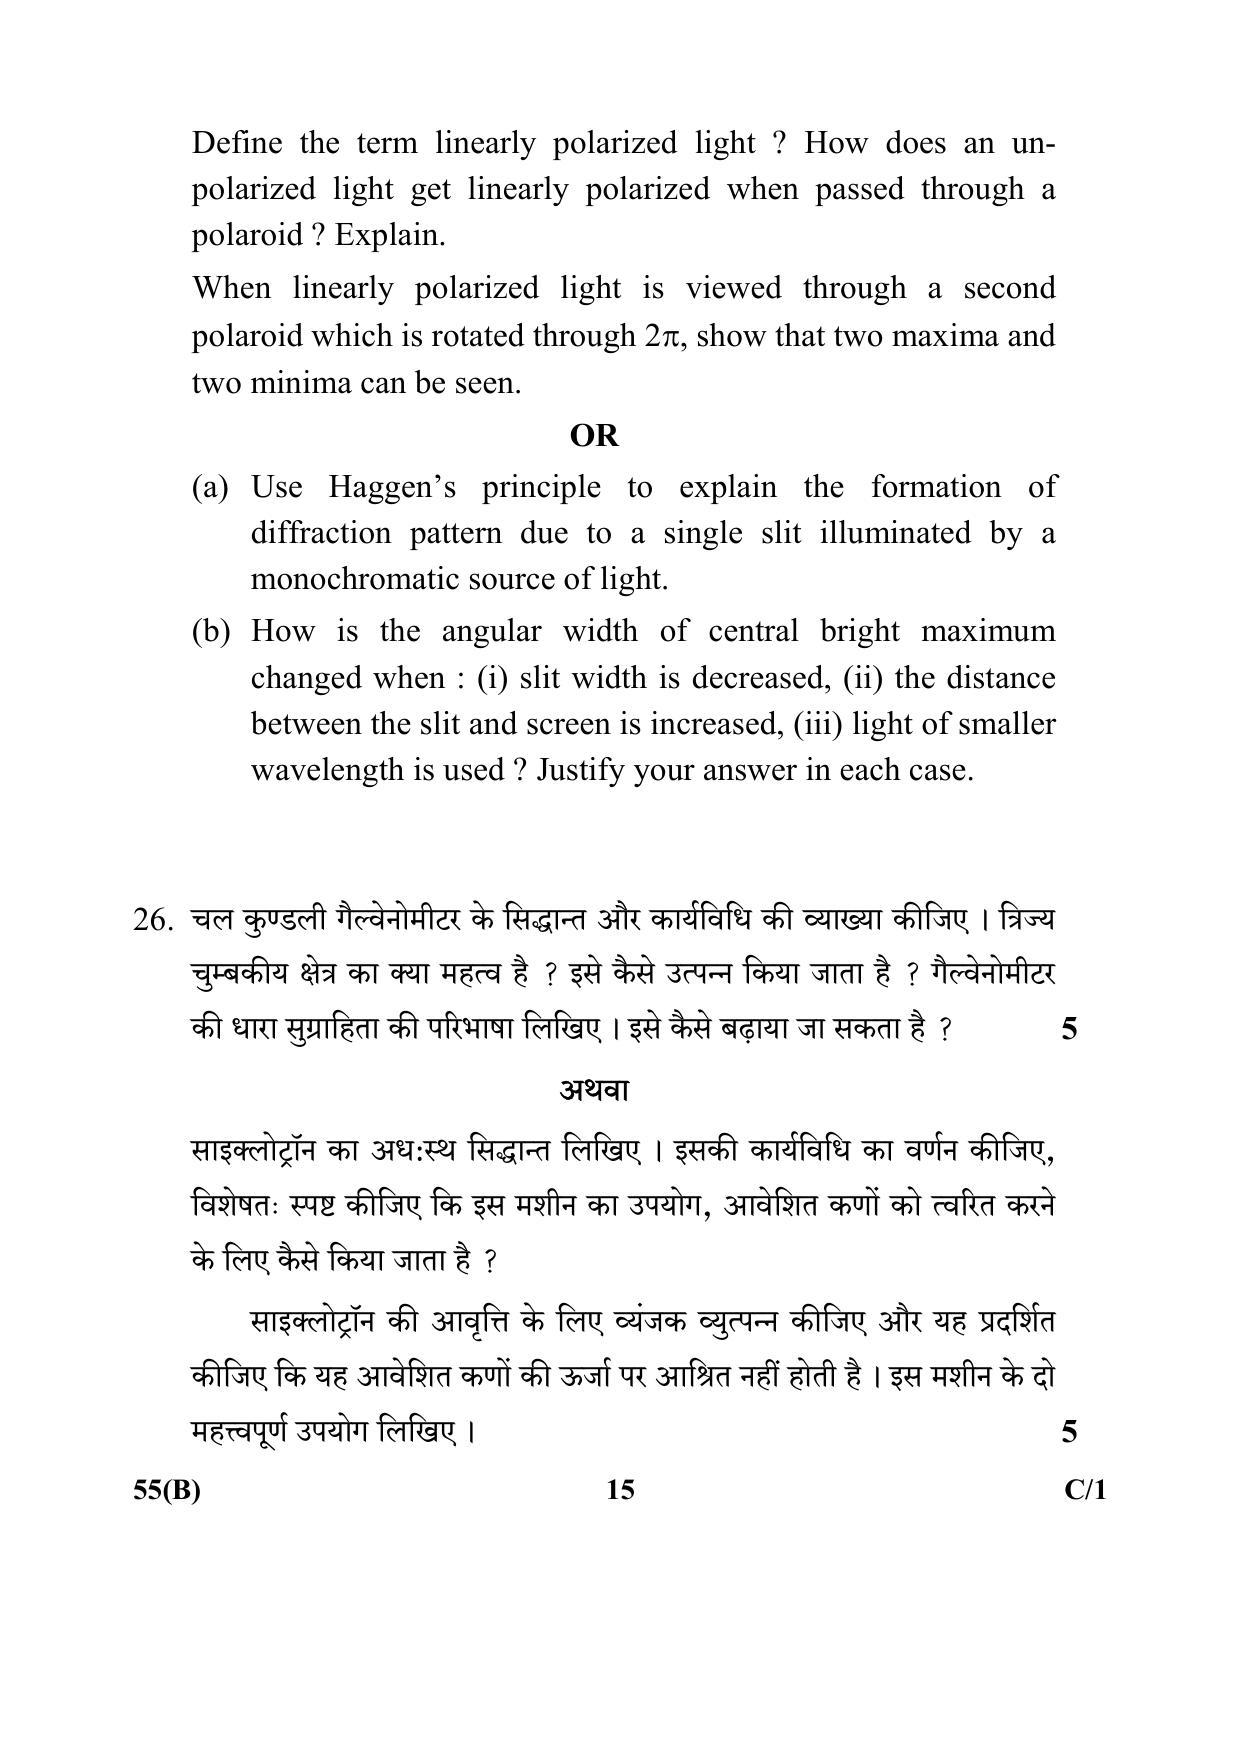 CBSE Class 12 55(B) (Physics) 2018 Compartment Question Paper - Page 15